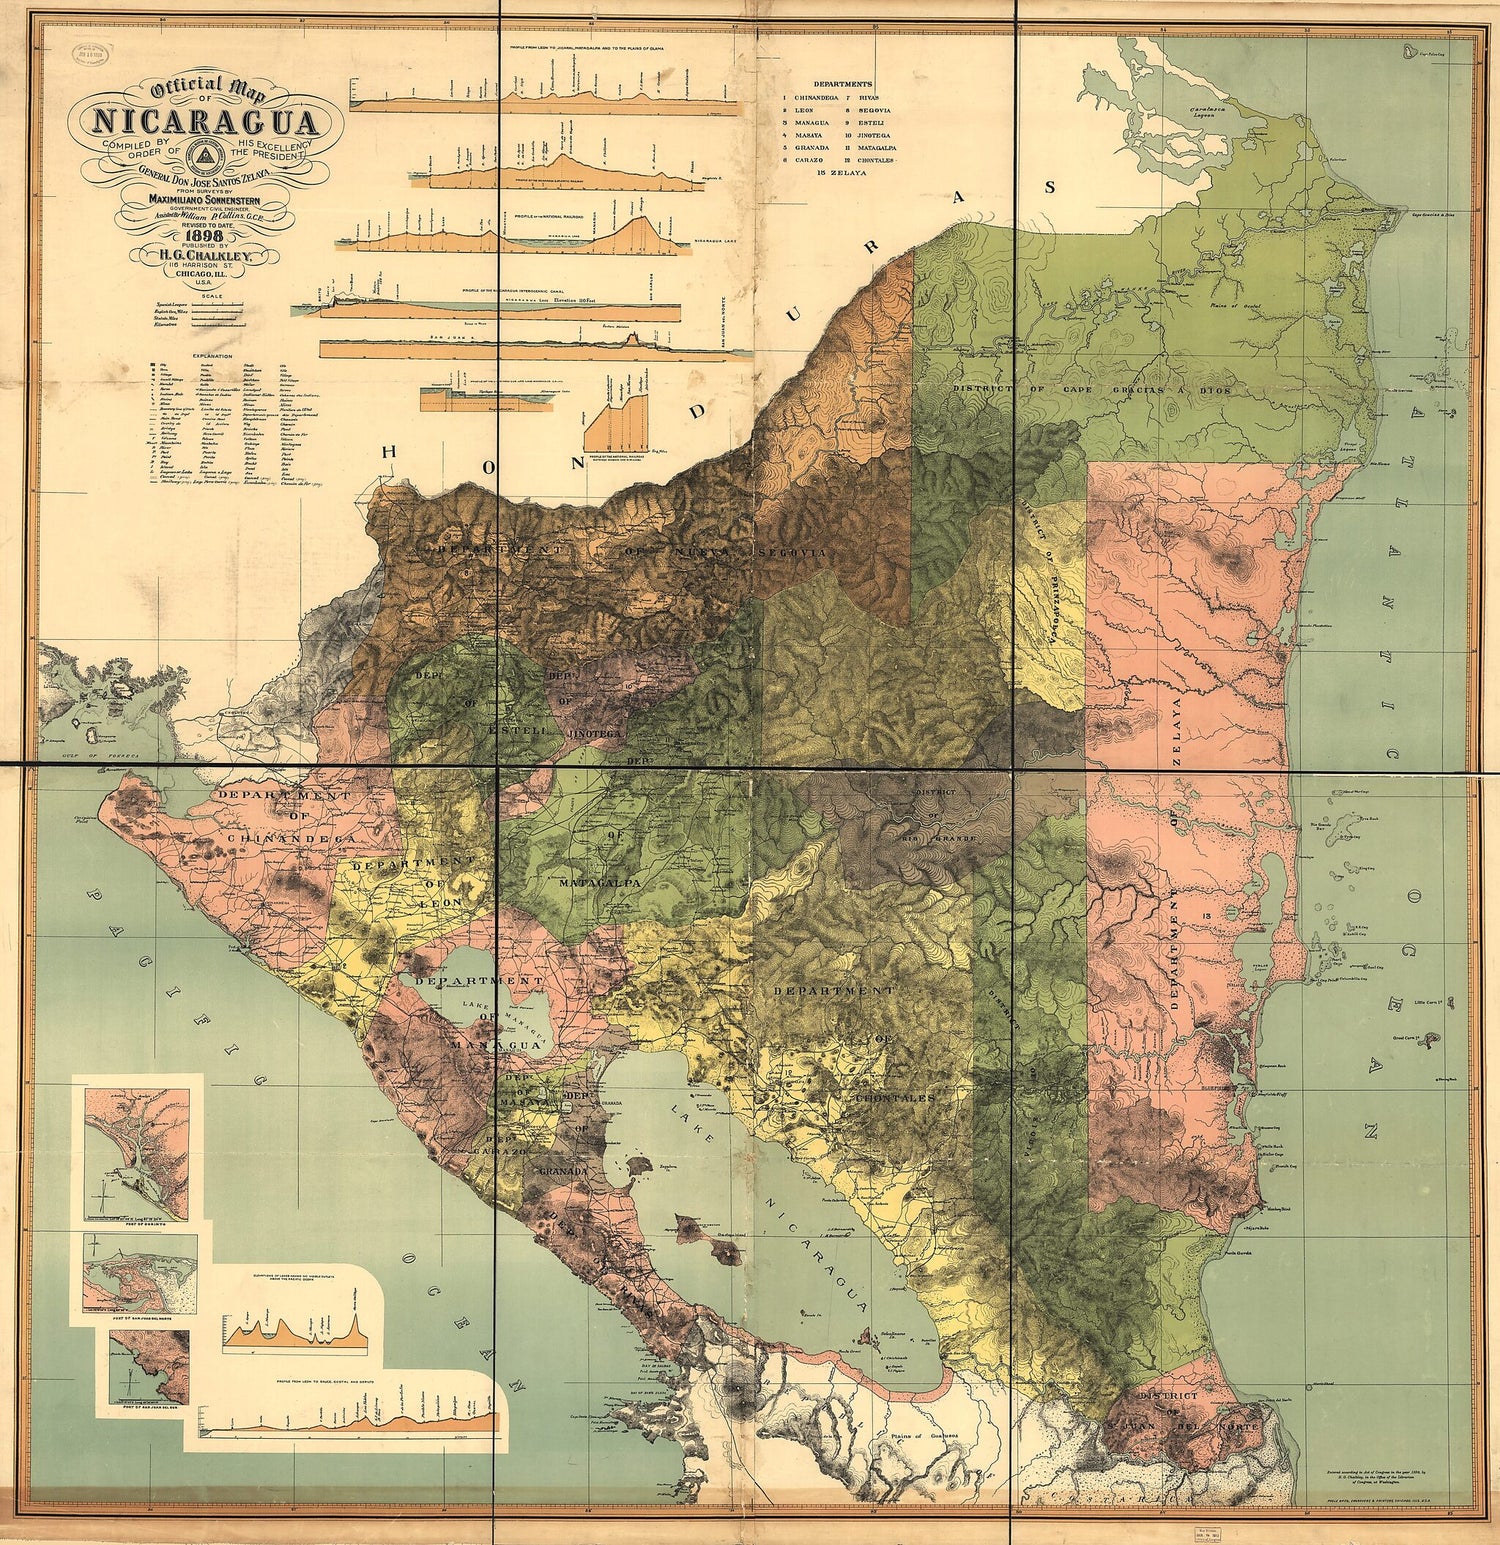 This old map of Official Map of Nicaragua from 1898 was created by William P. Collins,  H.G. Chalkley (Firm), Maximilian Von Sonnenstern in 1898